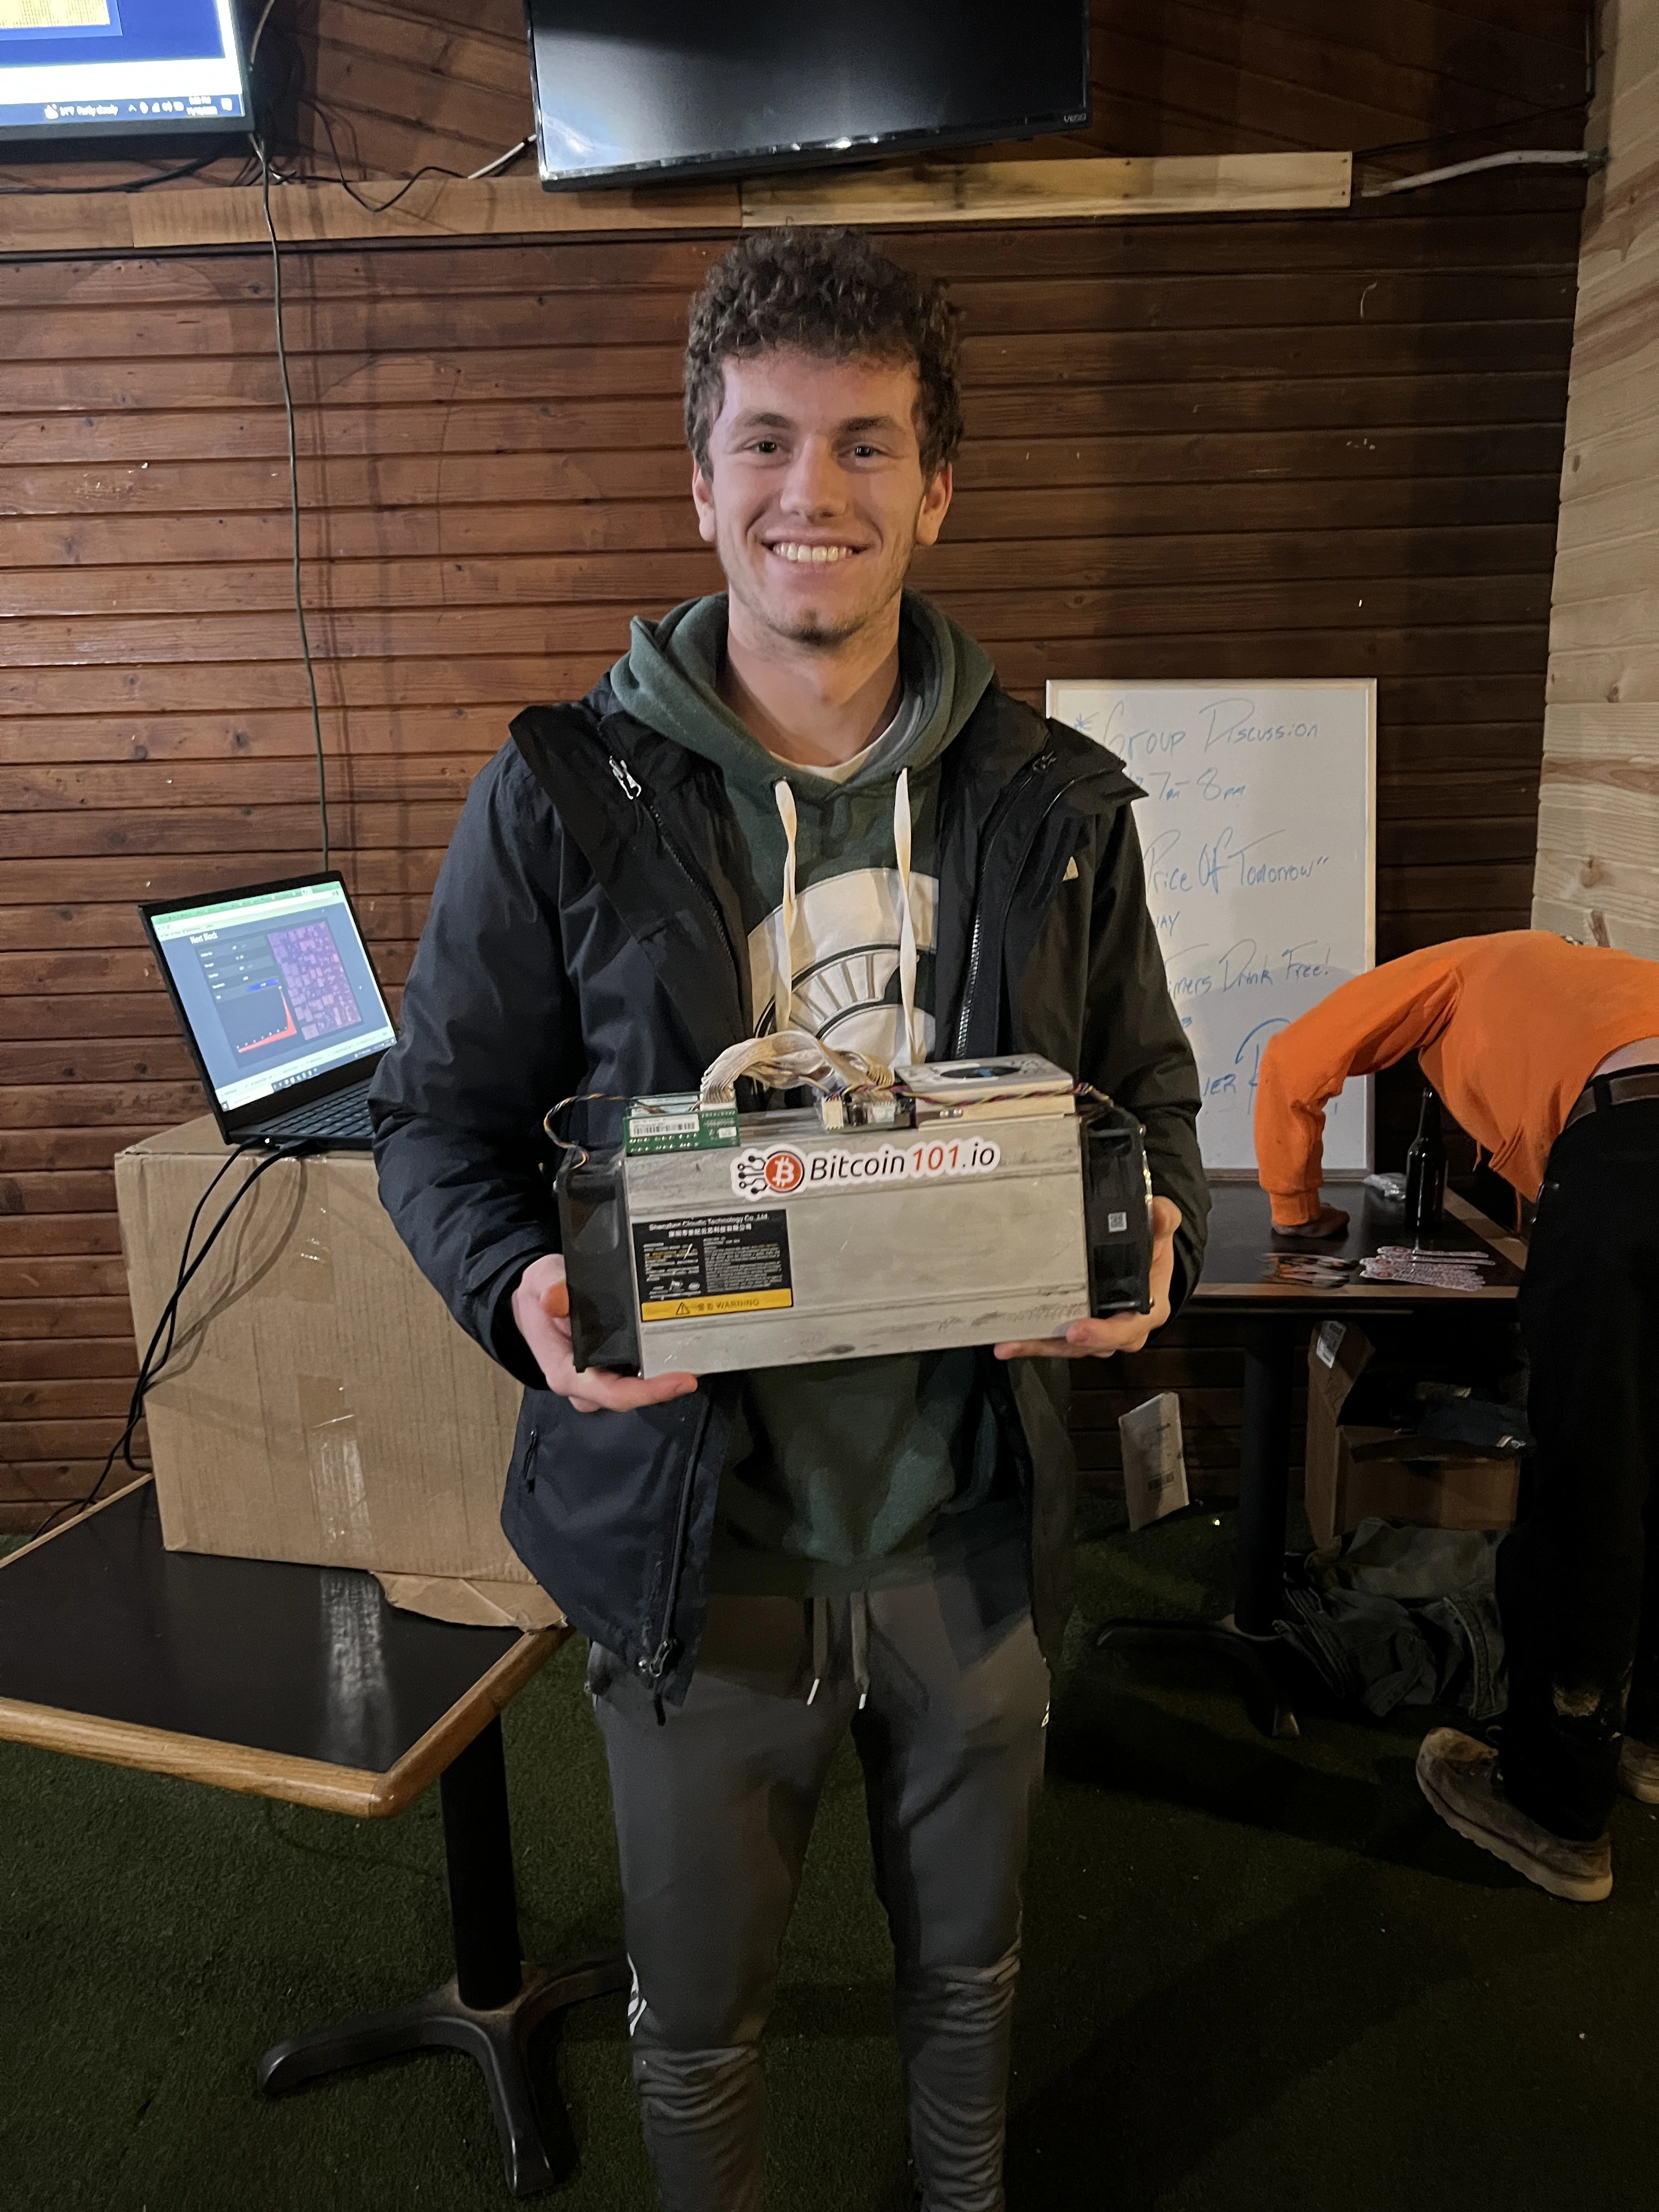 Picture of me holidng a s9 bitcoin miner in a michigan state sweatshirt